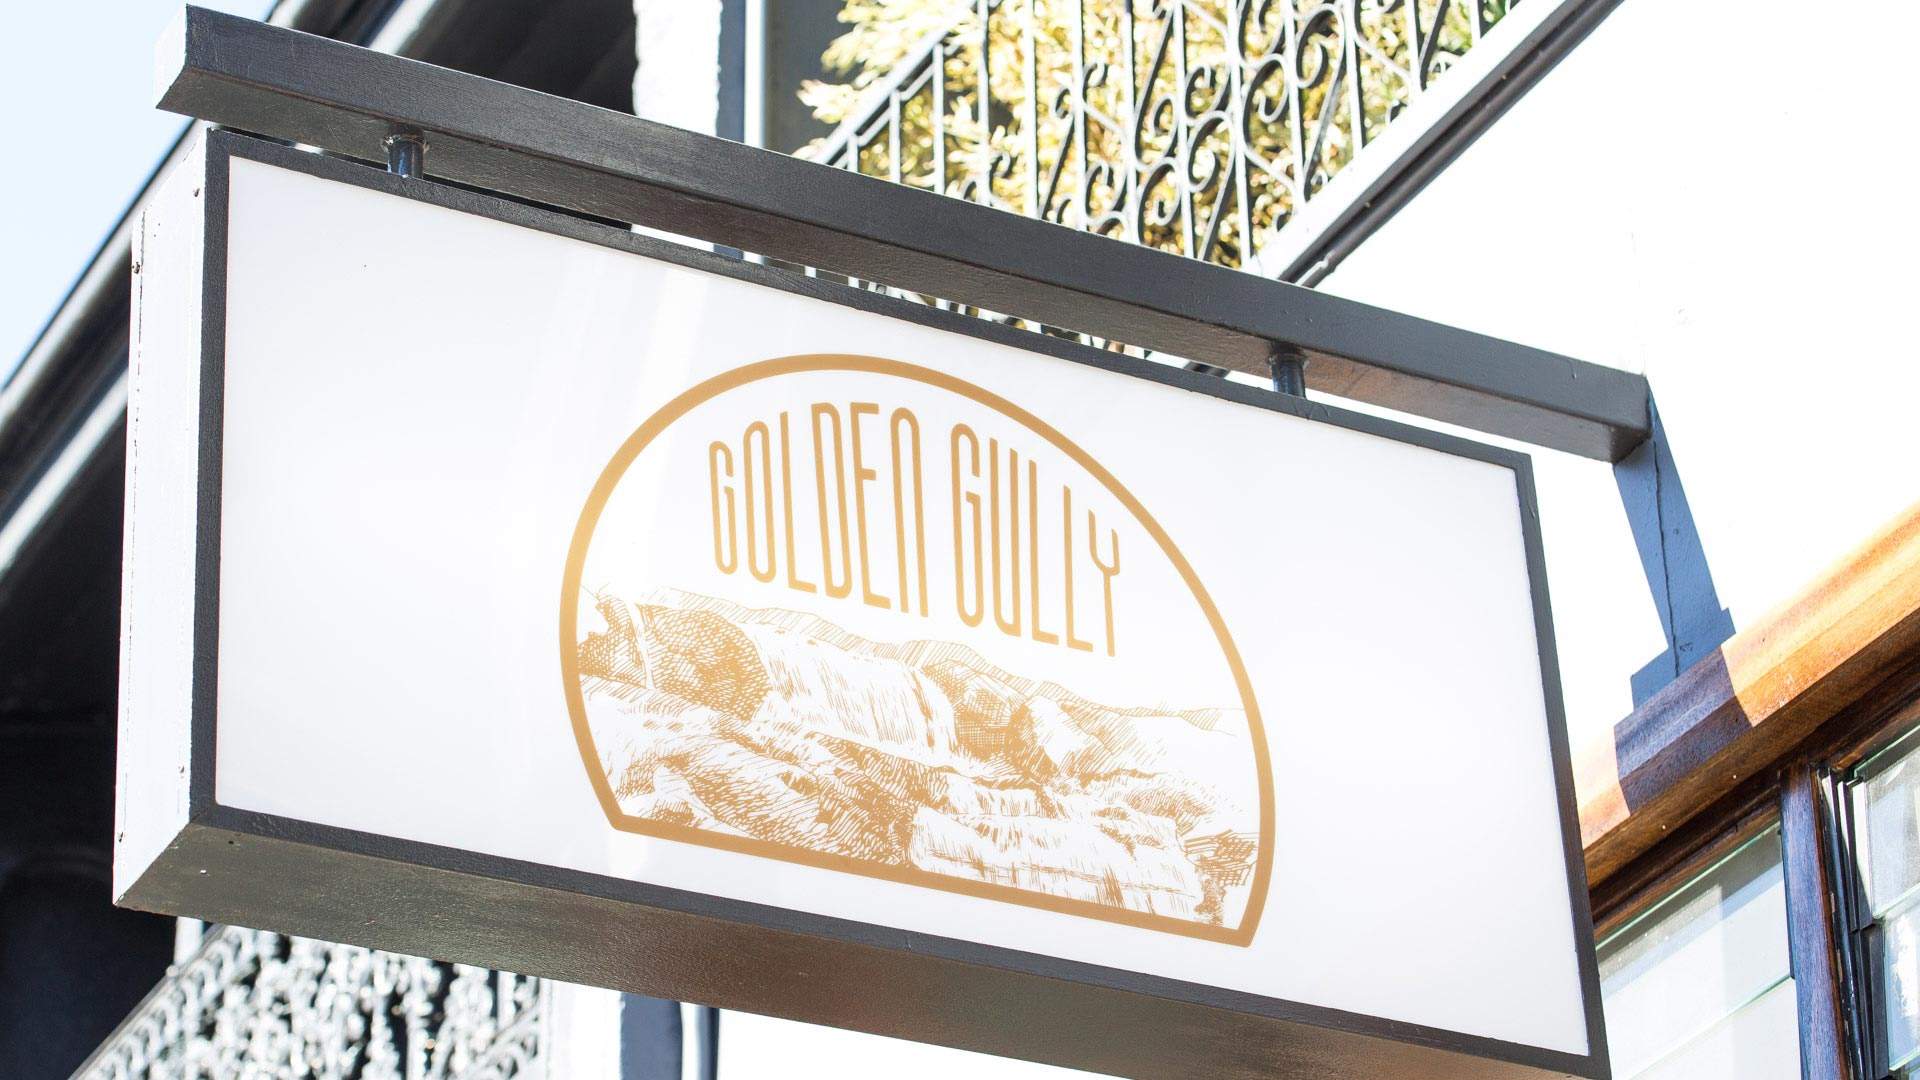 Golden Gully - CLOSED